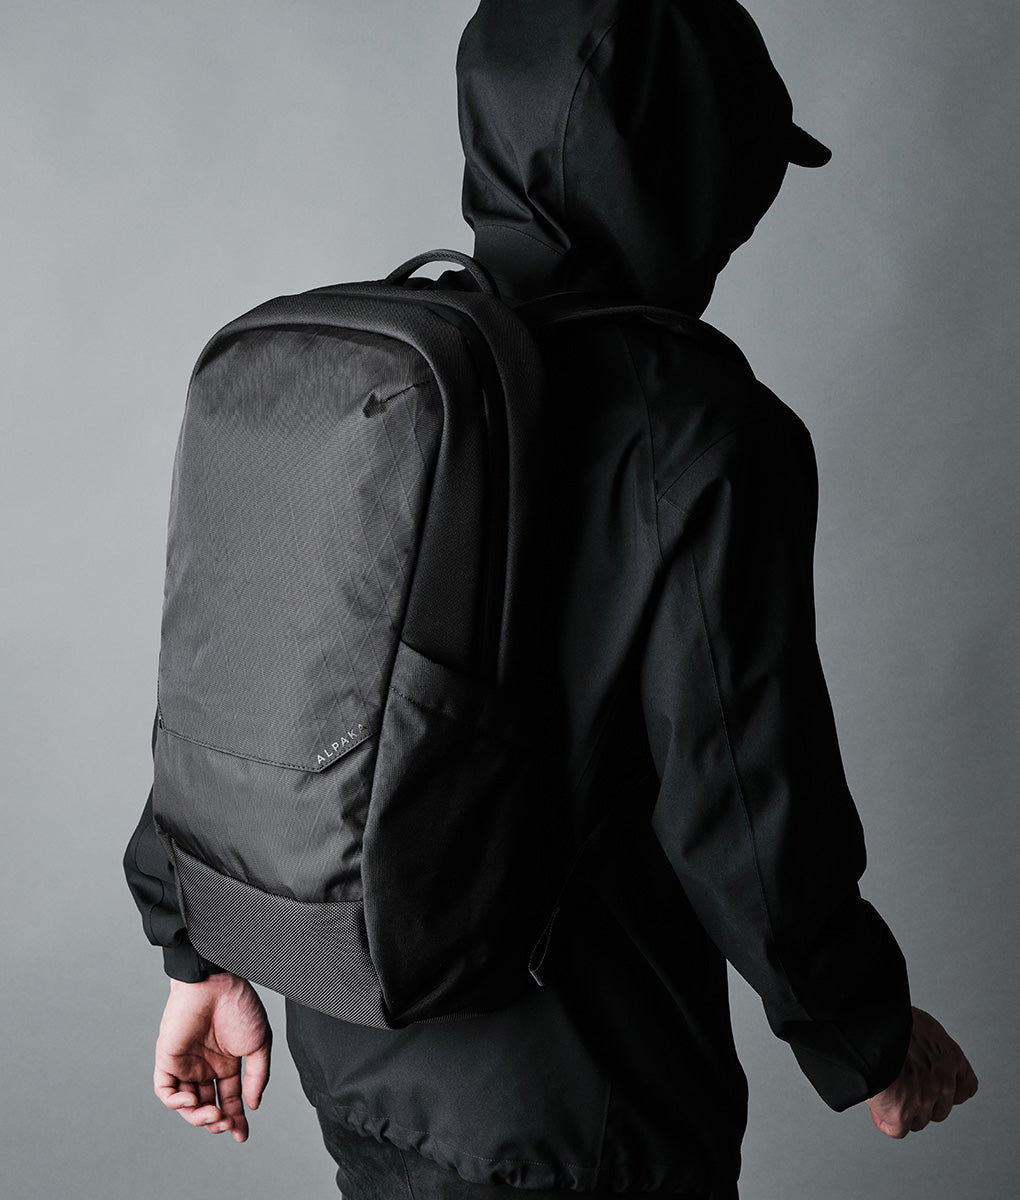 Alpaka Elements Backpack Limited Edition - Storming Gravity